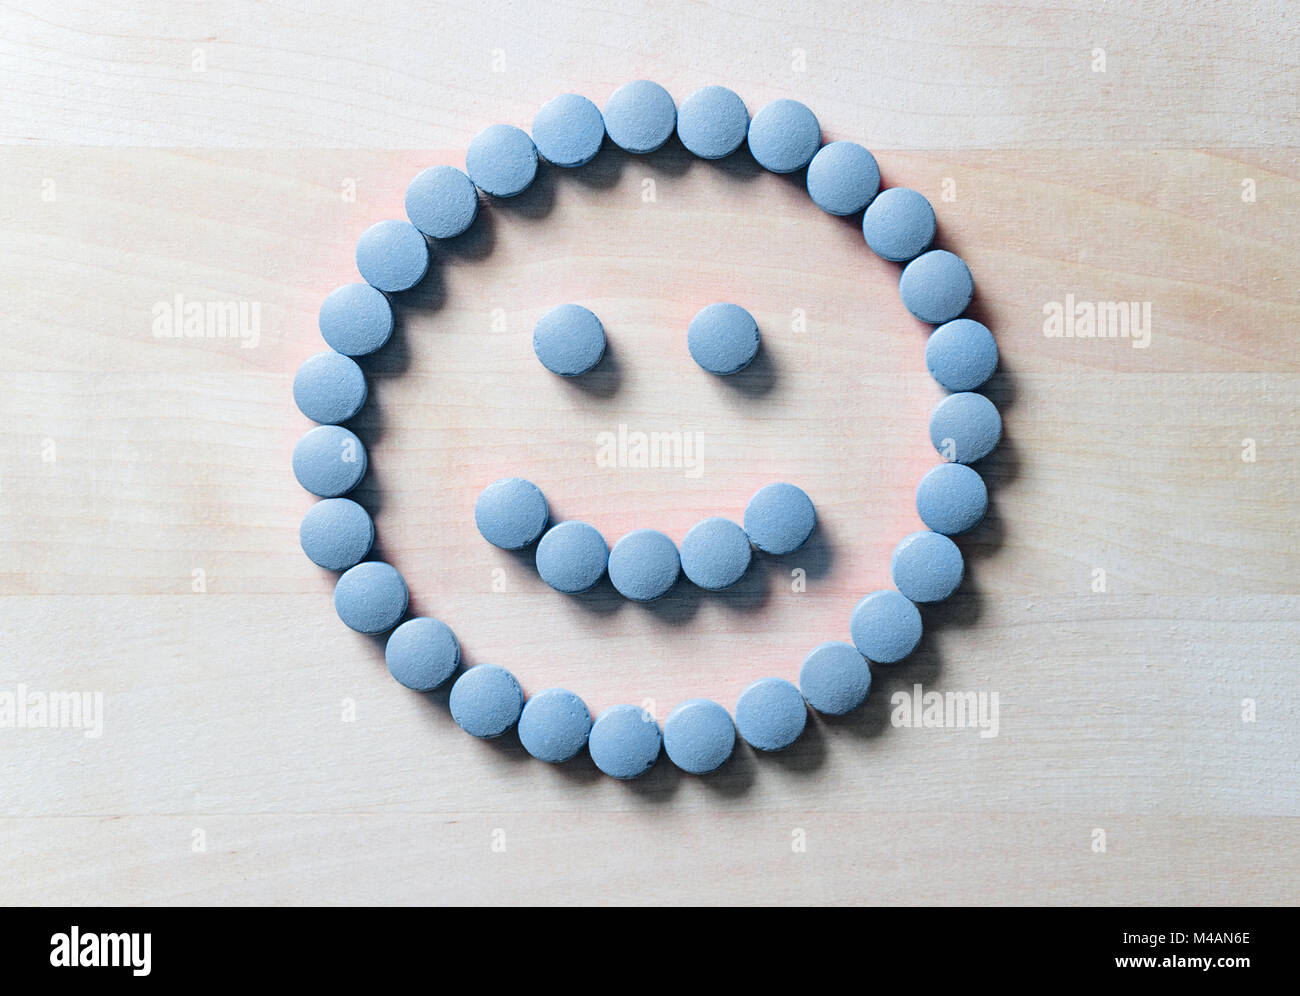 Smiley face from pills on wooden table. Happy and positive feeling from successful healing process or satisfied with health care and doctor services.  Stock Photo